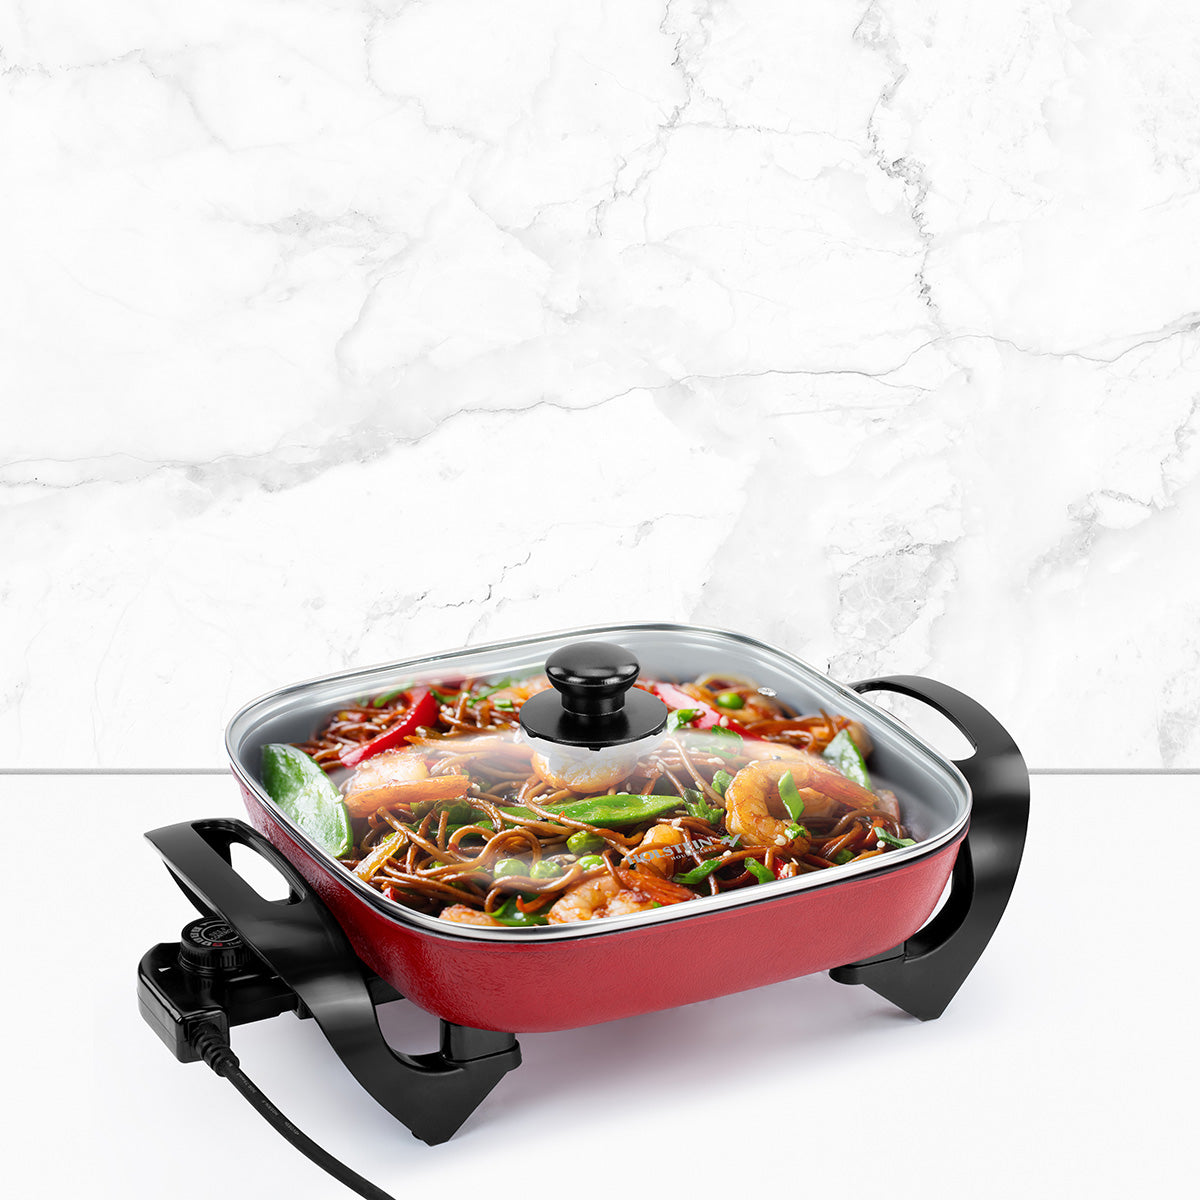 12-INCH ELECTRIC SKILLET